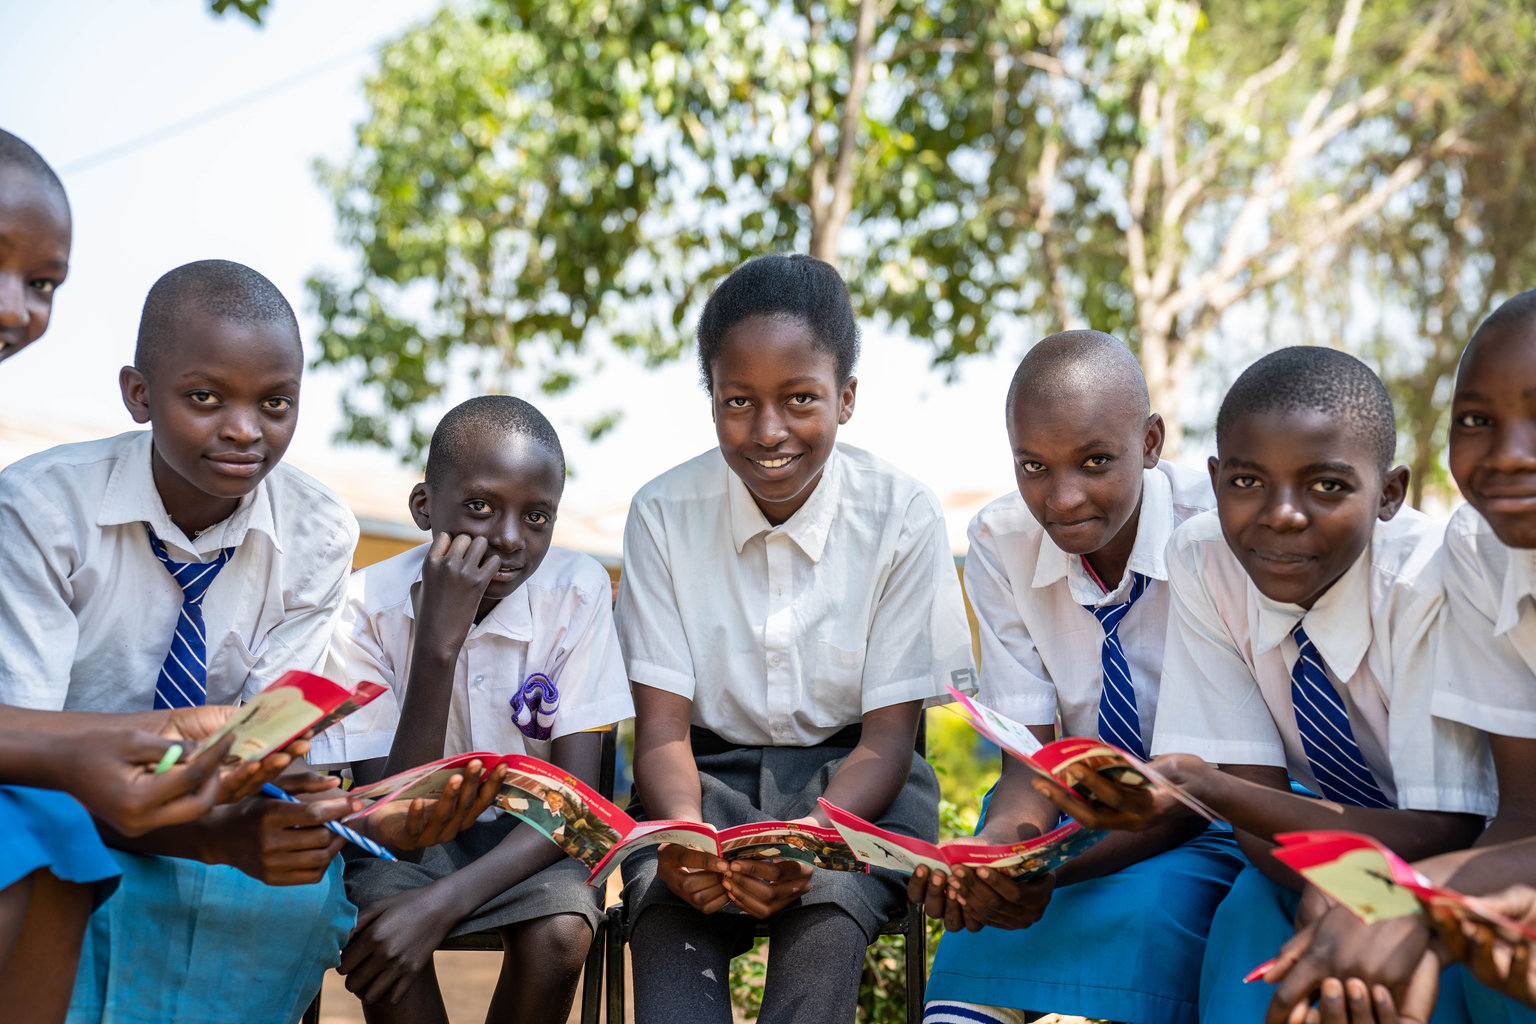  A group of students in school uniforms look up from reading pamphlets and smile at the camera. They are outside.